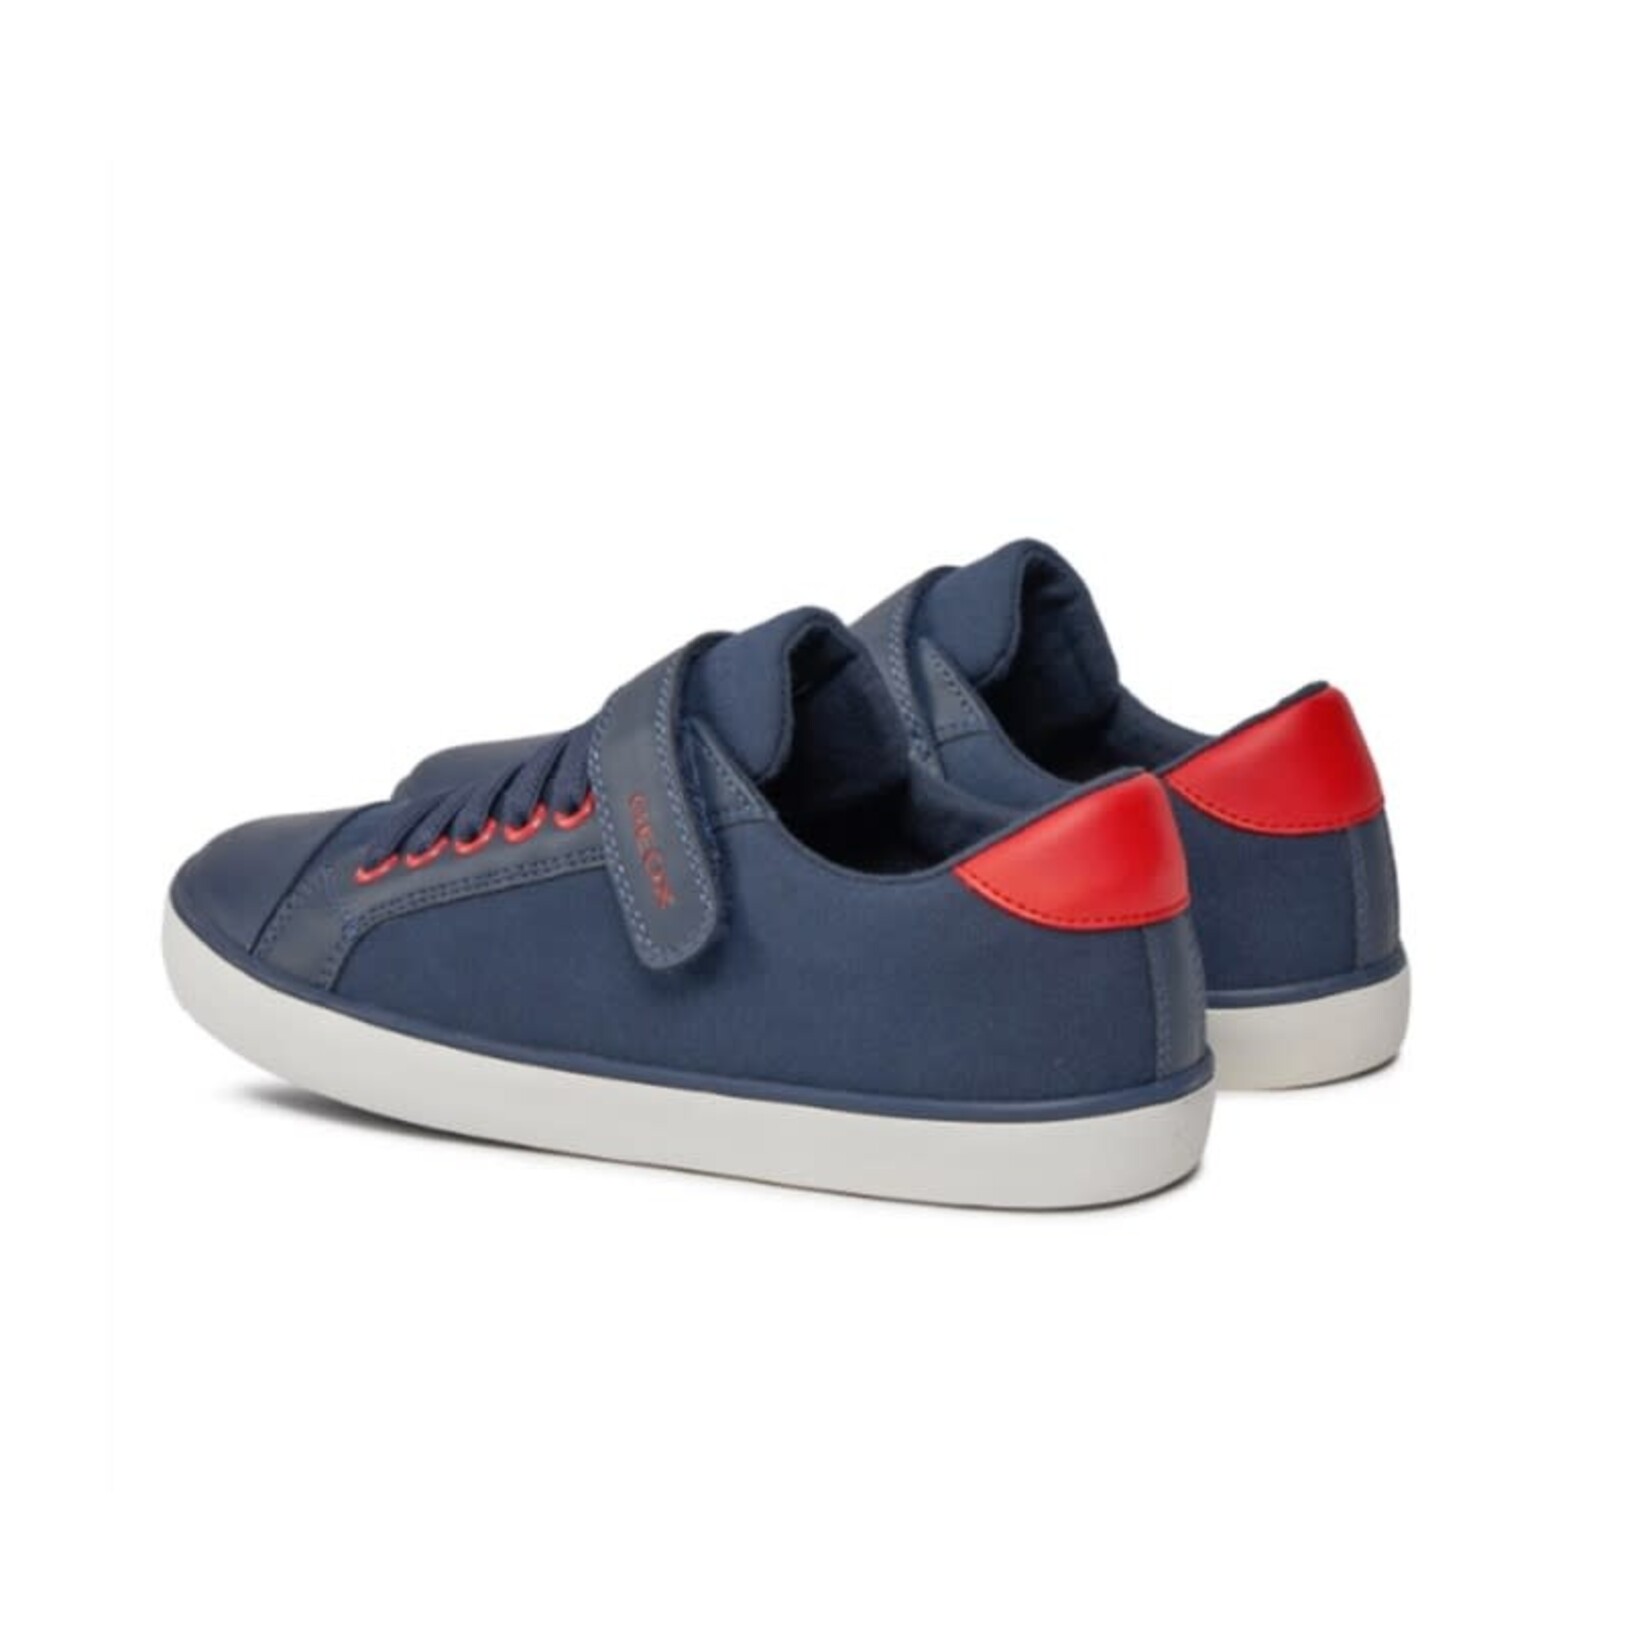 Geox GEOX - Navy synthetic leather and textile sneakers 'Gisli - Navy/Red'